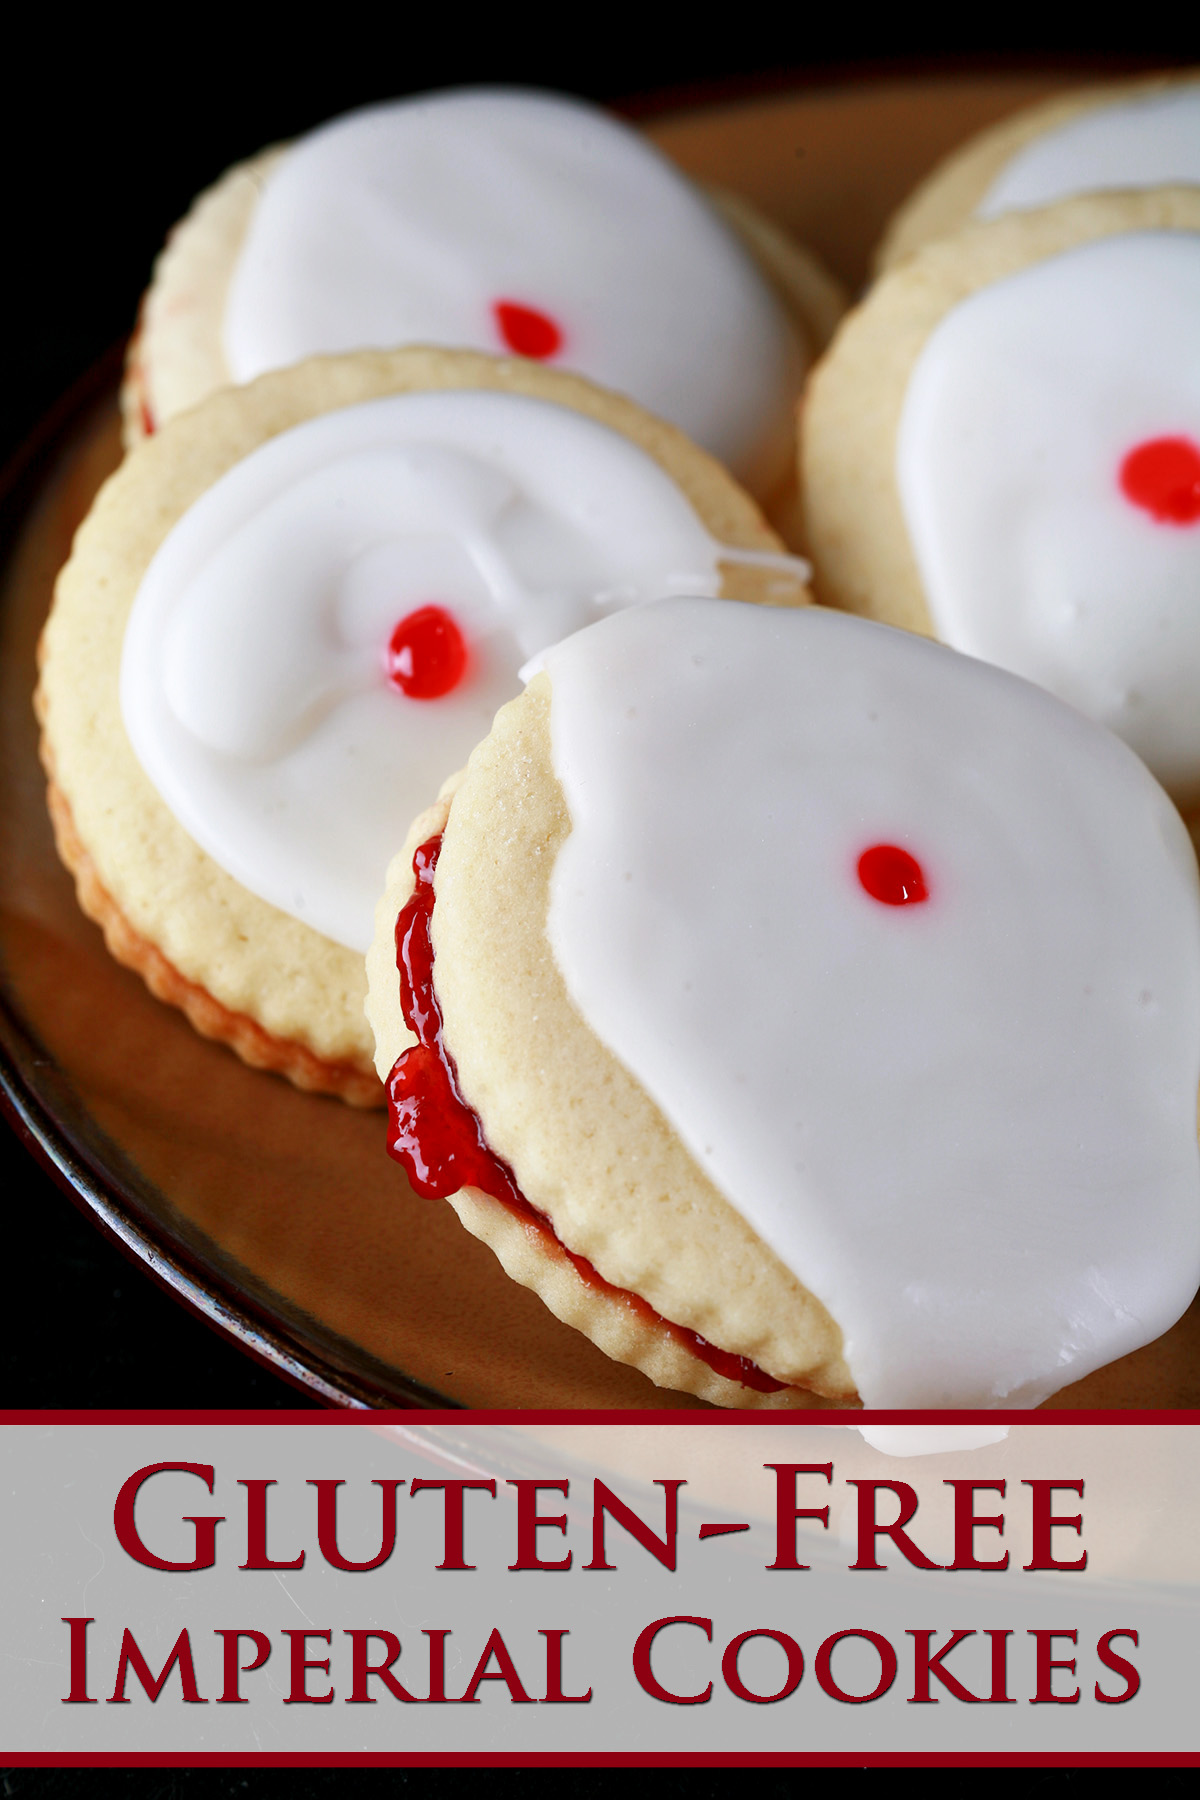 Close up view of a plate of gluten-free imperial cookies: Sandwich cookies filled with raspberry jam, frosted with a white glaze, and finished off with a dot of red gel in the center.